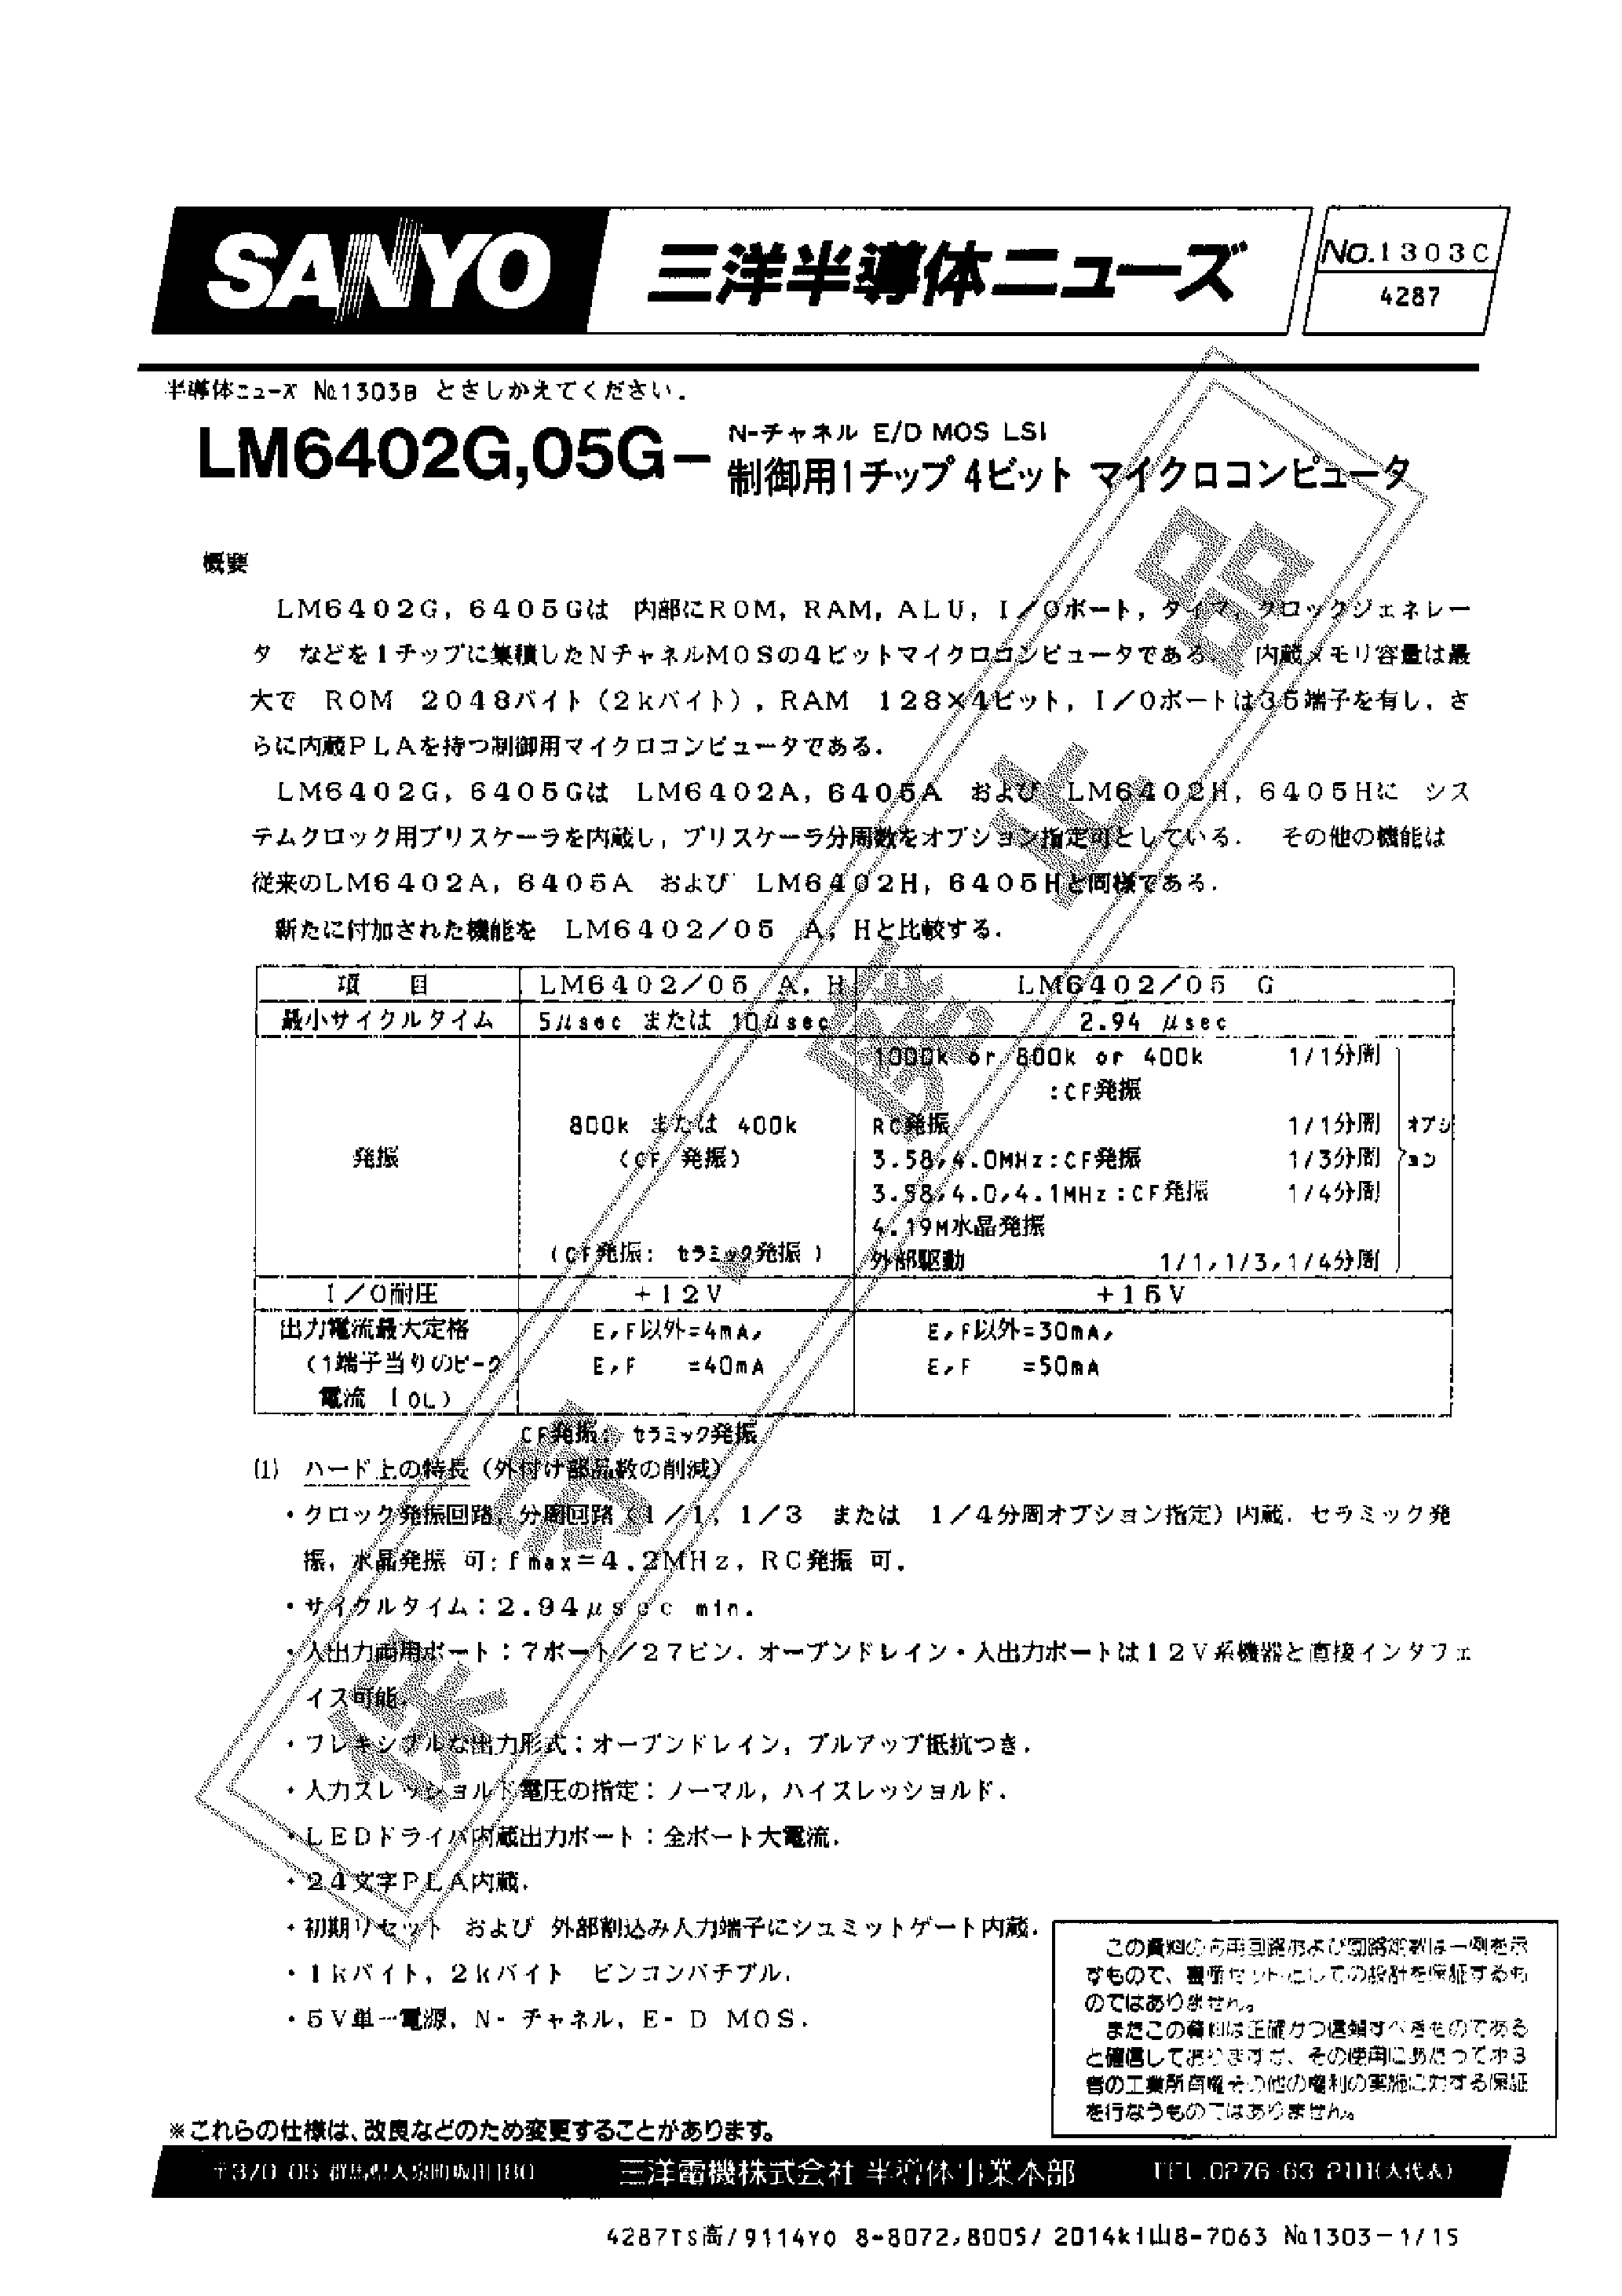 Datasheet LM6402G - (LM6402G/05G) N CHANNEL E/D MOS LSI 4 BIT MICROCOMPUTER page 1